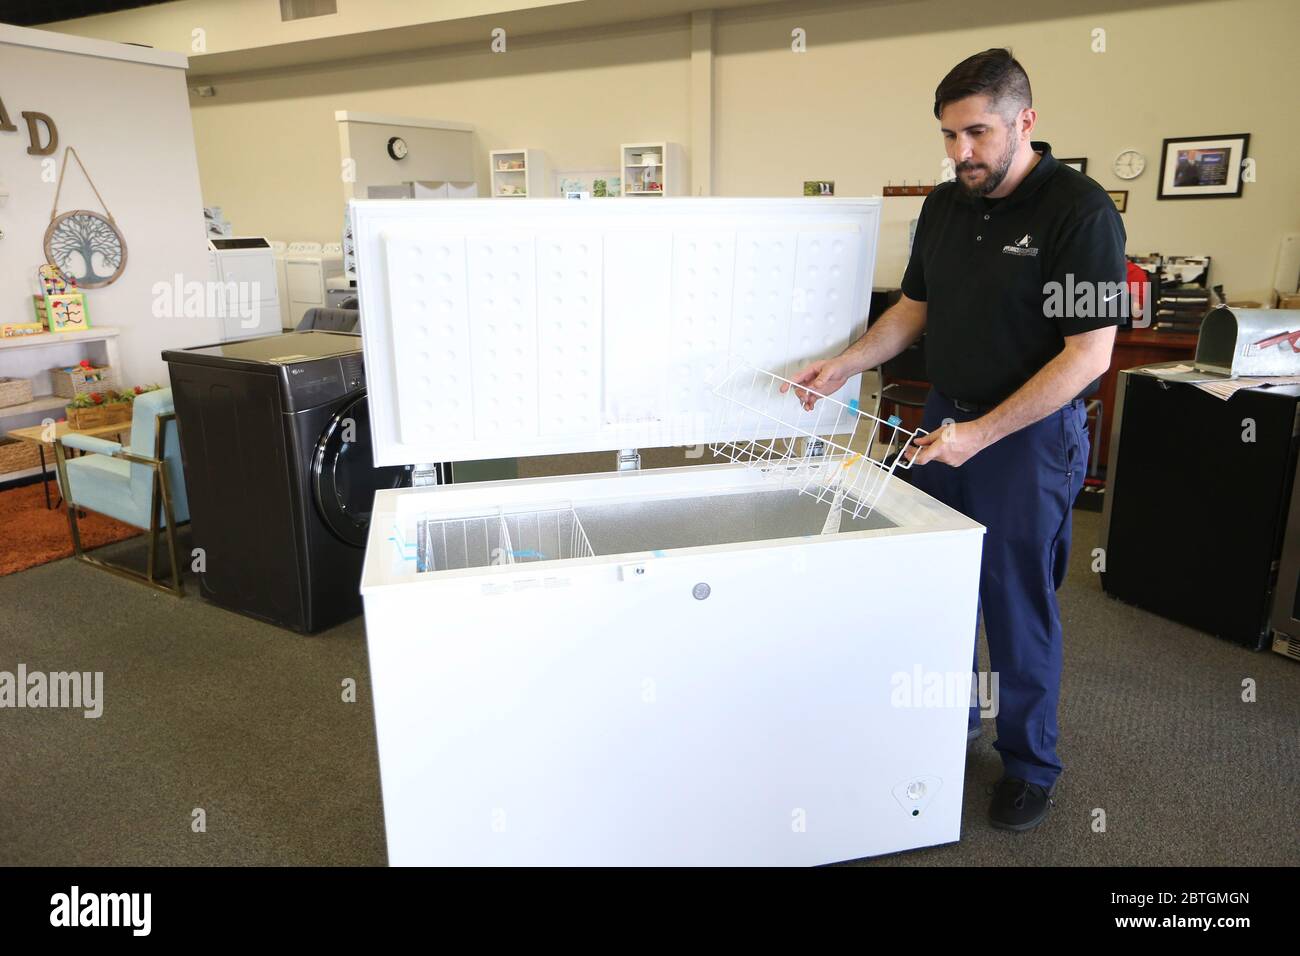 St. Louis, United States. 25th May, 2020. Sales person Armando McVey examines a new freezer that has just arrived on the sales floor at The Appliance Discounters in St. Louis on May 25, 2020. As people purchase more food to freeze and reduce their trips to the store, due to COVID-19 concerns, there has been a double-digit increases in the number of freezers sold compared to the same time last year. Most deep freezers are either sold out or on back order for several months. Photo by Bill Greenblatt/UPI Credit: UPI/Alamy Live News Stock Photo